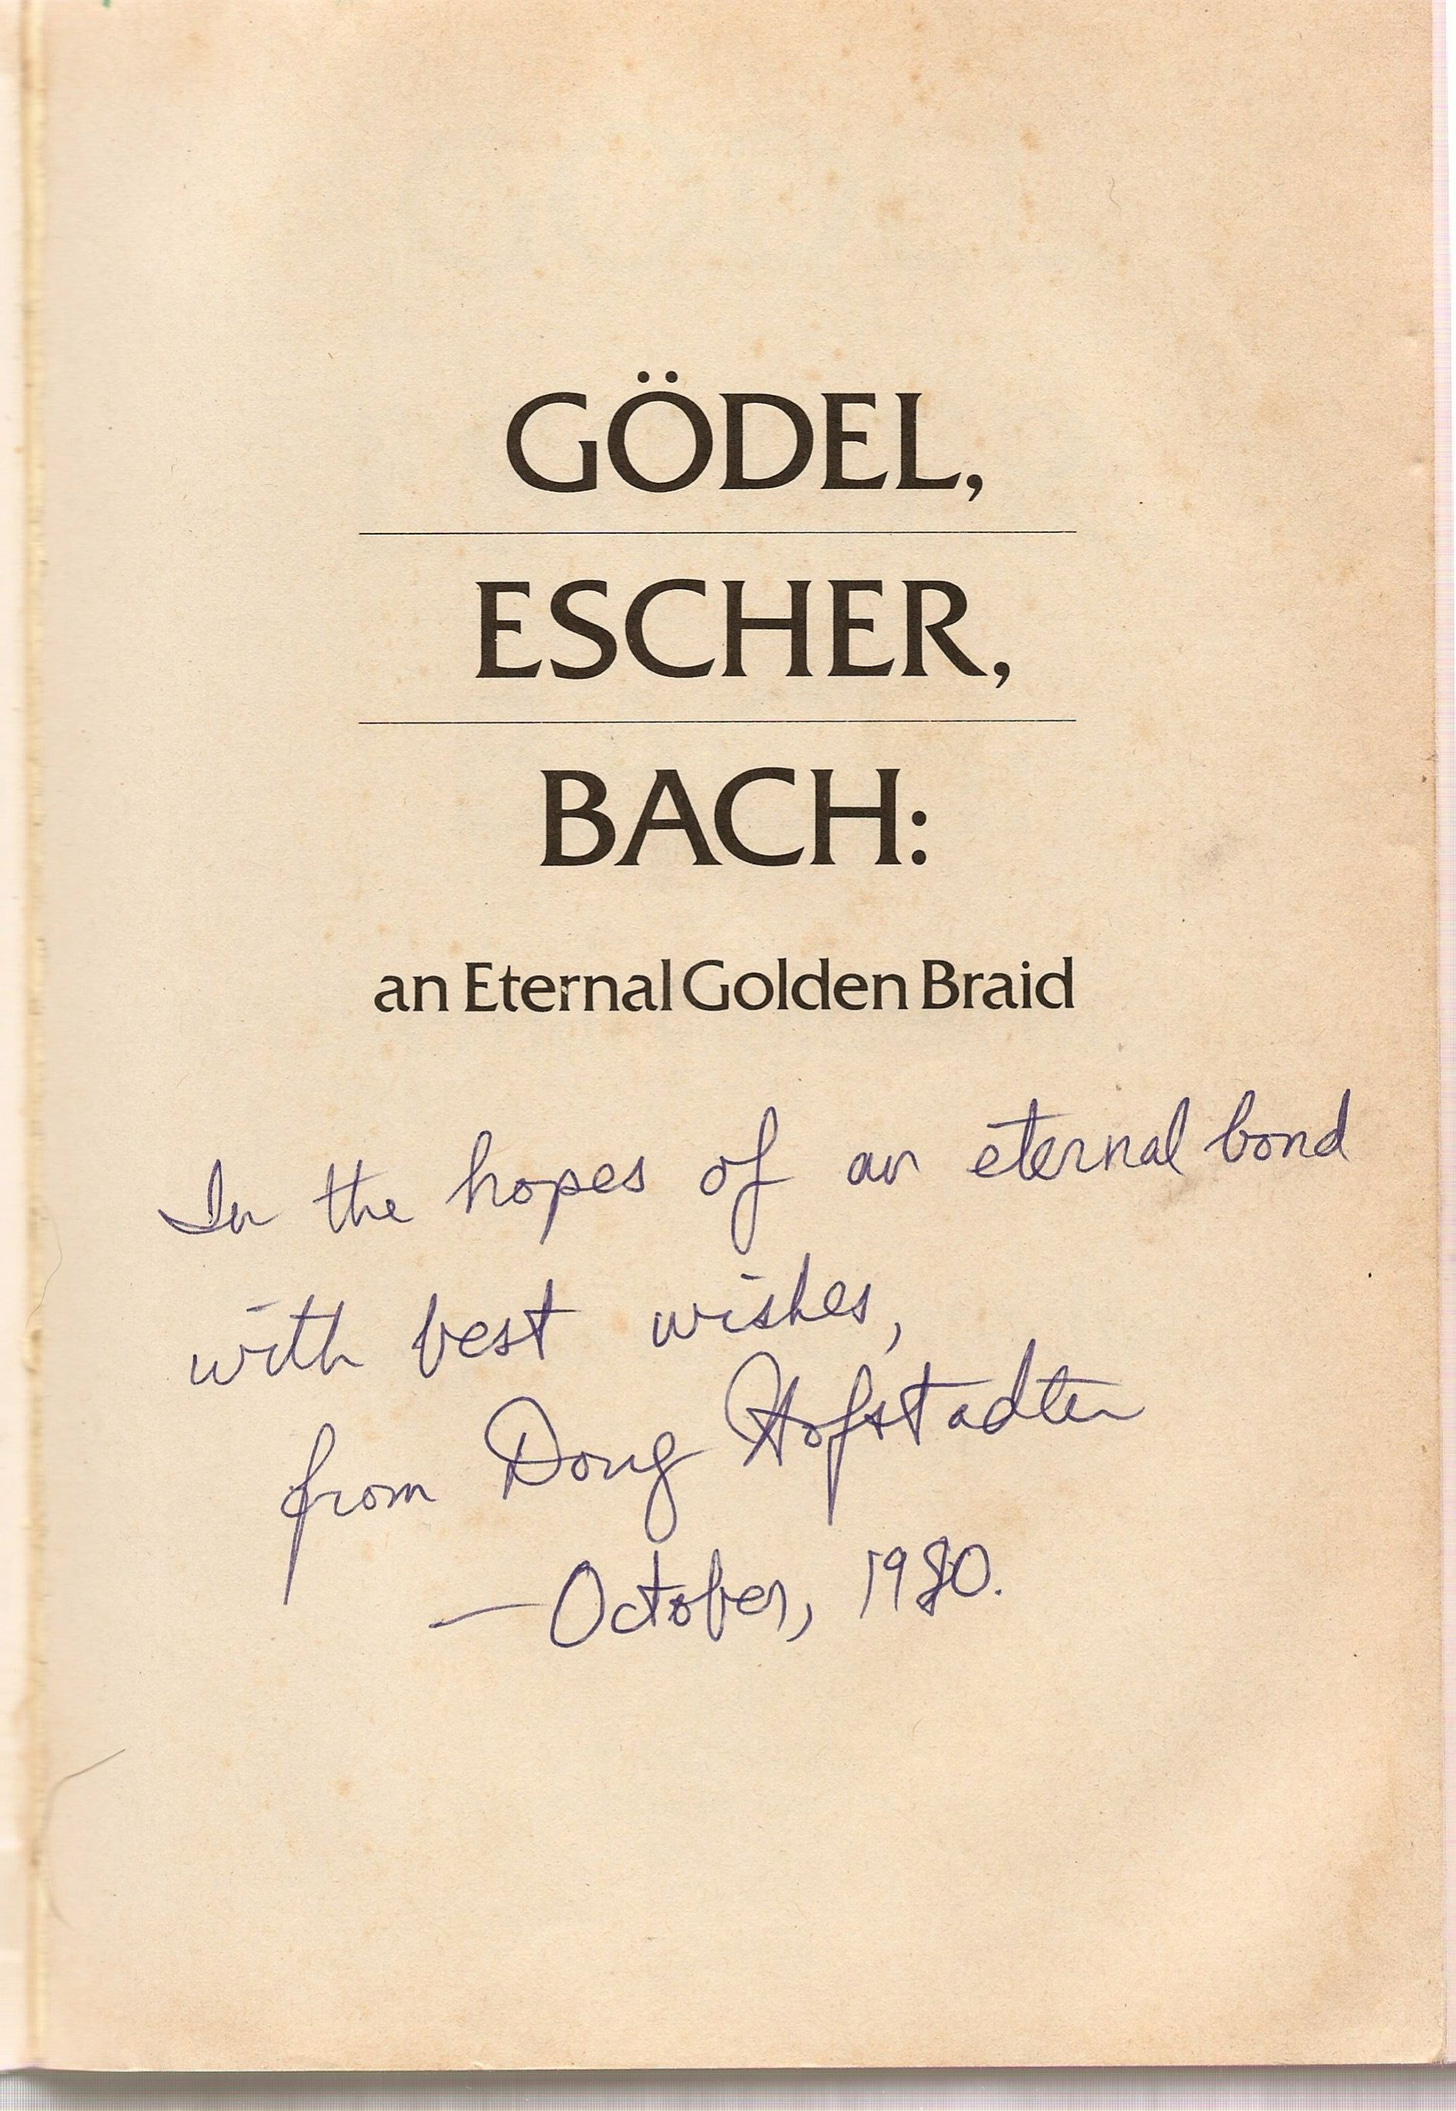  Title page from Douglas Hofstadter’s  Godel Escher Bach, with the inscription, “With hopes of an eternal bond,” from Doug Hofstadter, October 1980